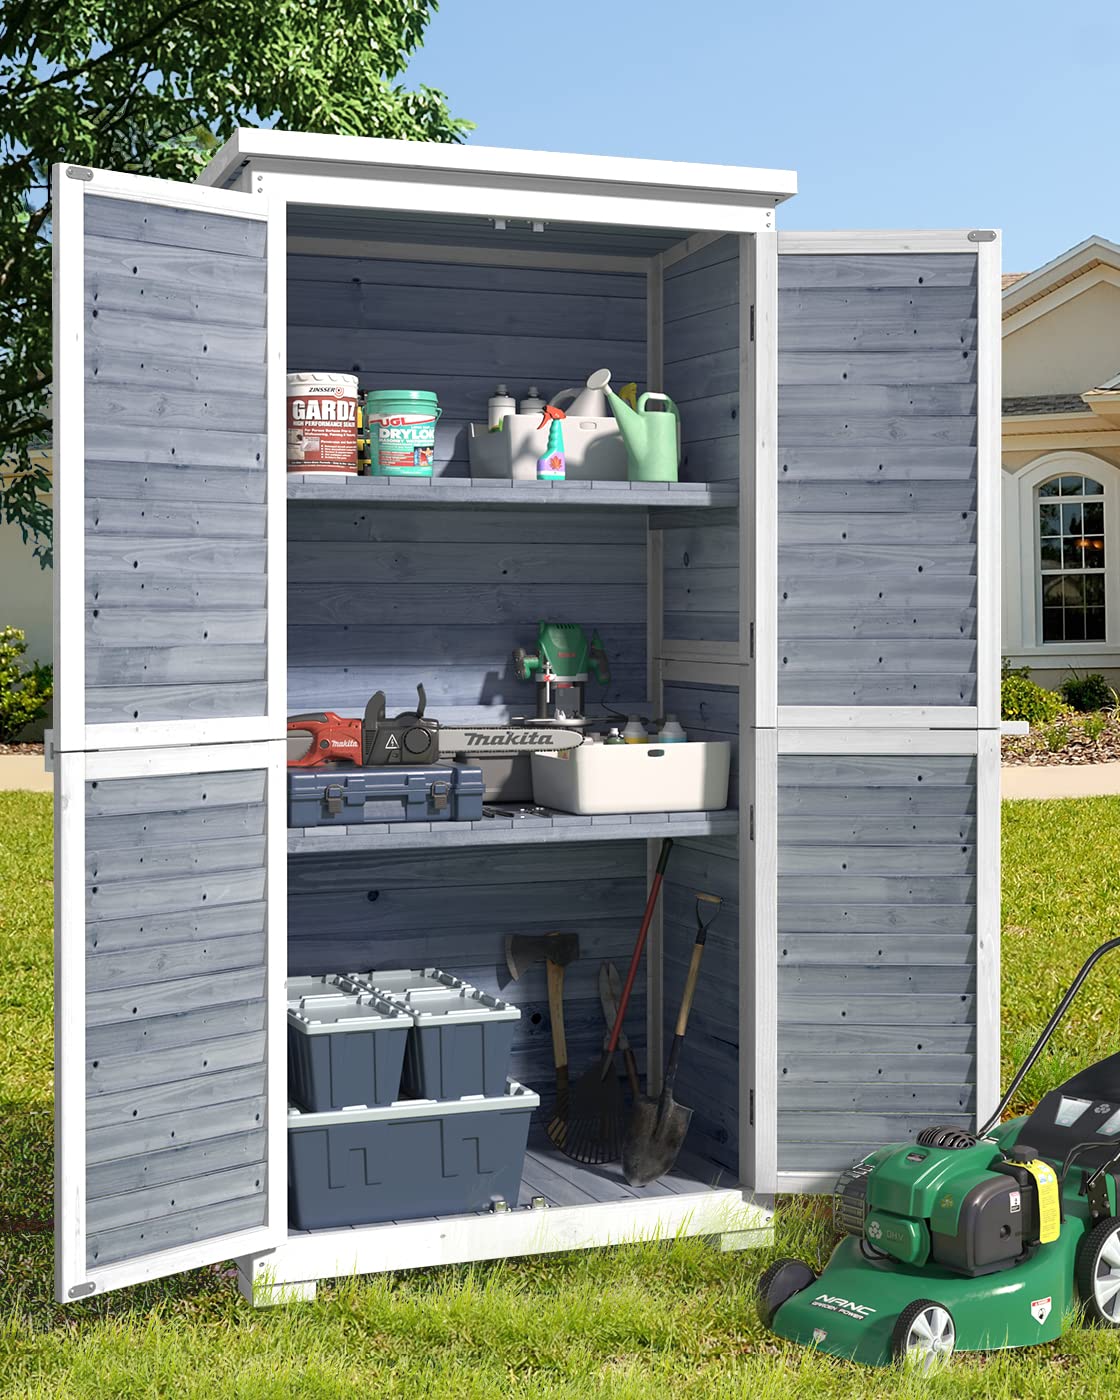 Gizoon CC30 Outdoor Wooden Storage Cabinet with 3 Shelves and Waterproof Roof